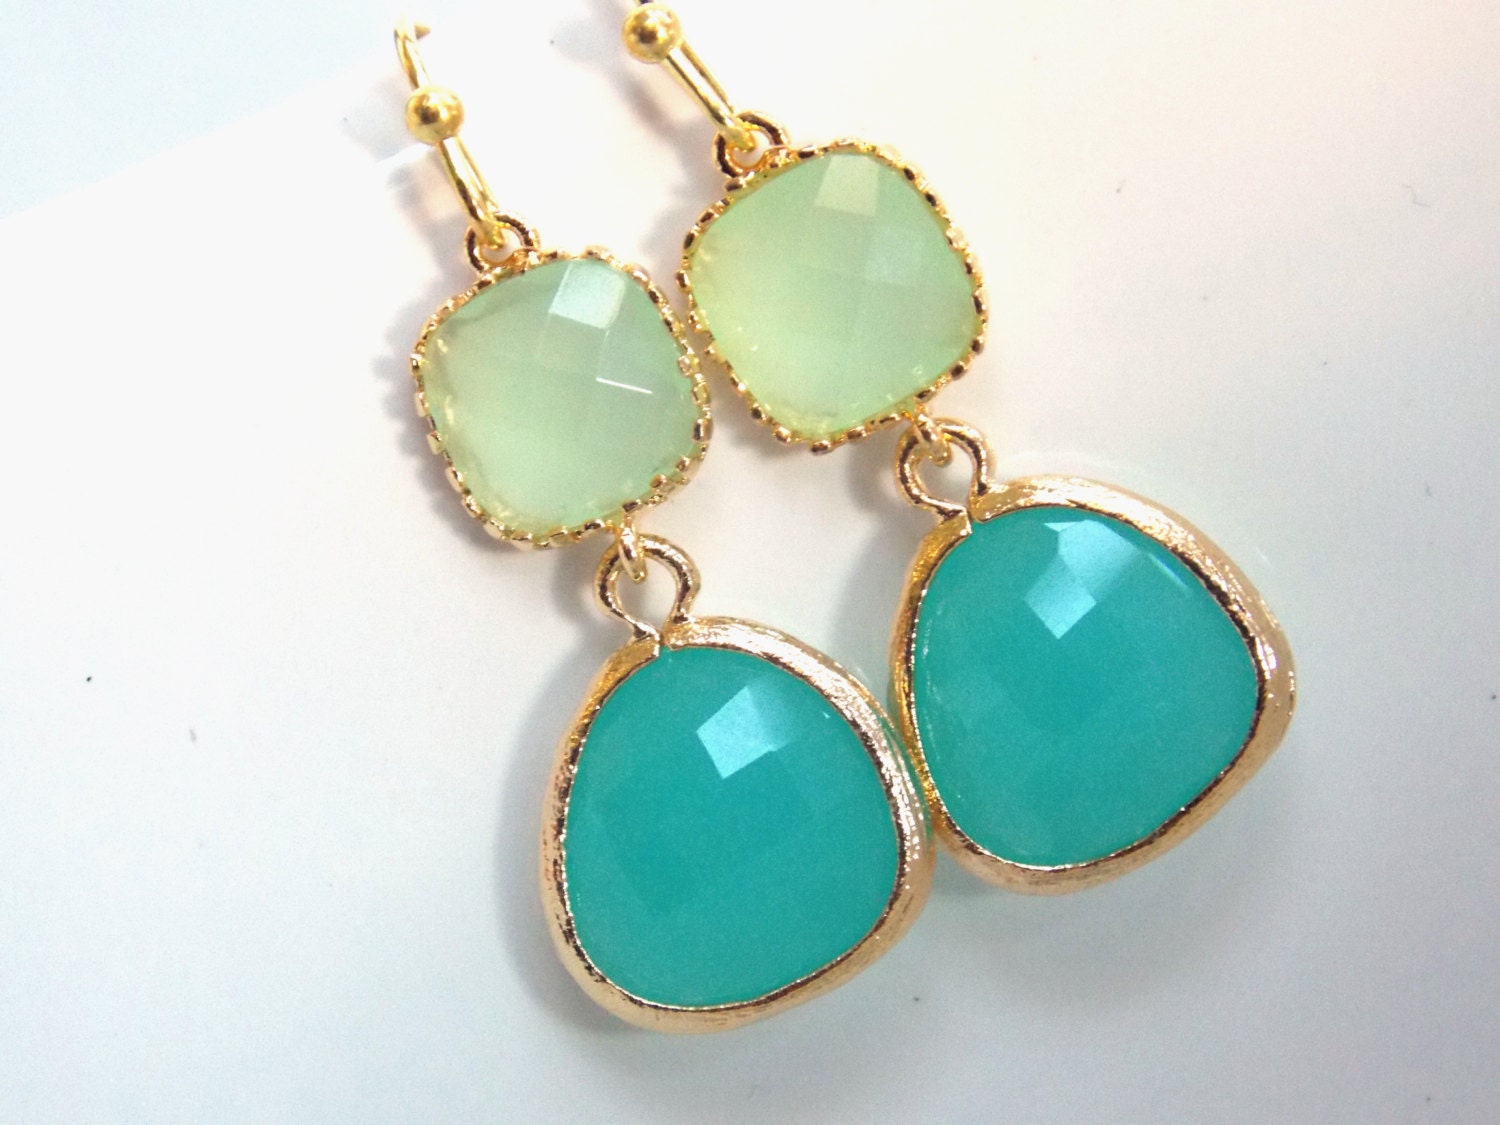 Stunning glass gold earrings in mint and light mint green color! These beautiful glass faceted beads are suspended from gold plated ear wire. Absolutely gorgeous!